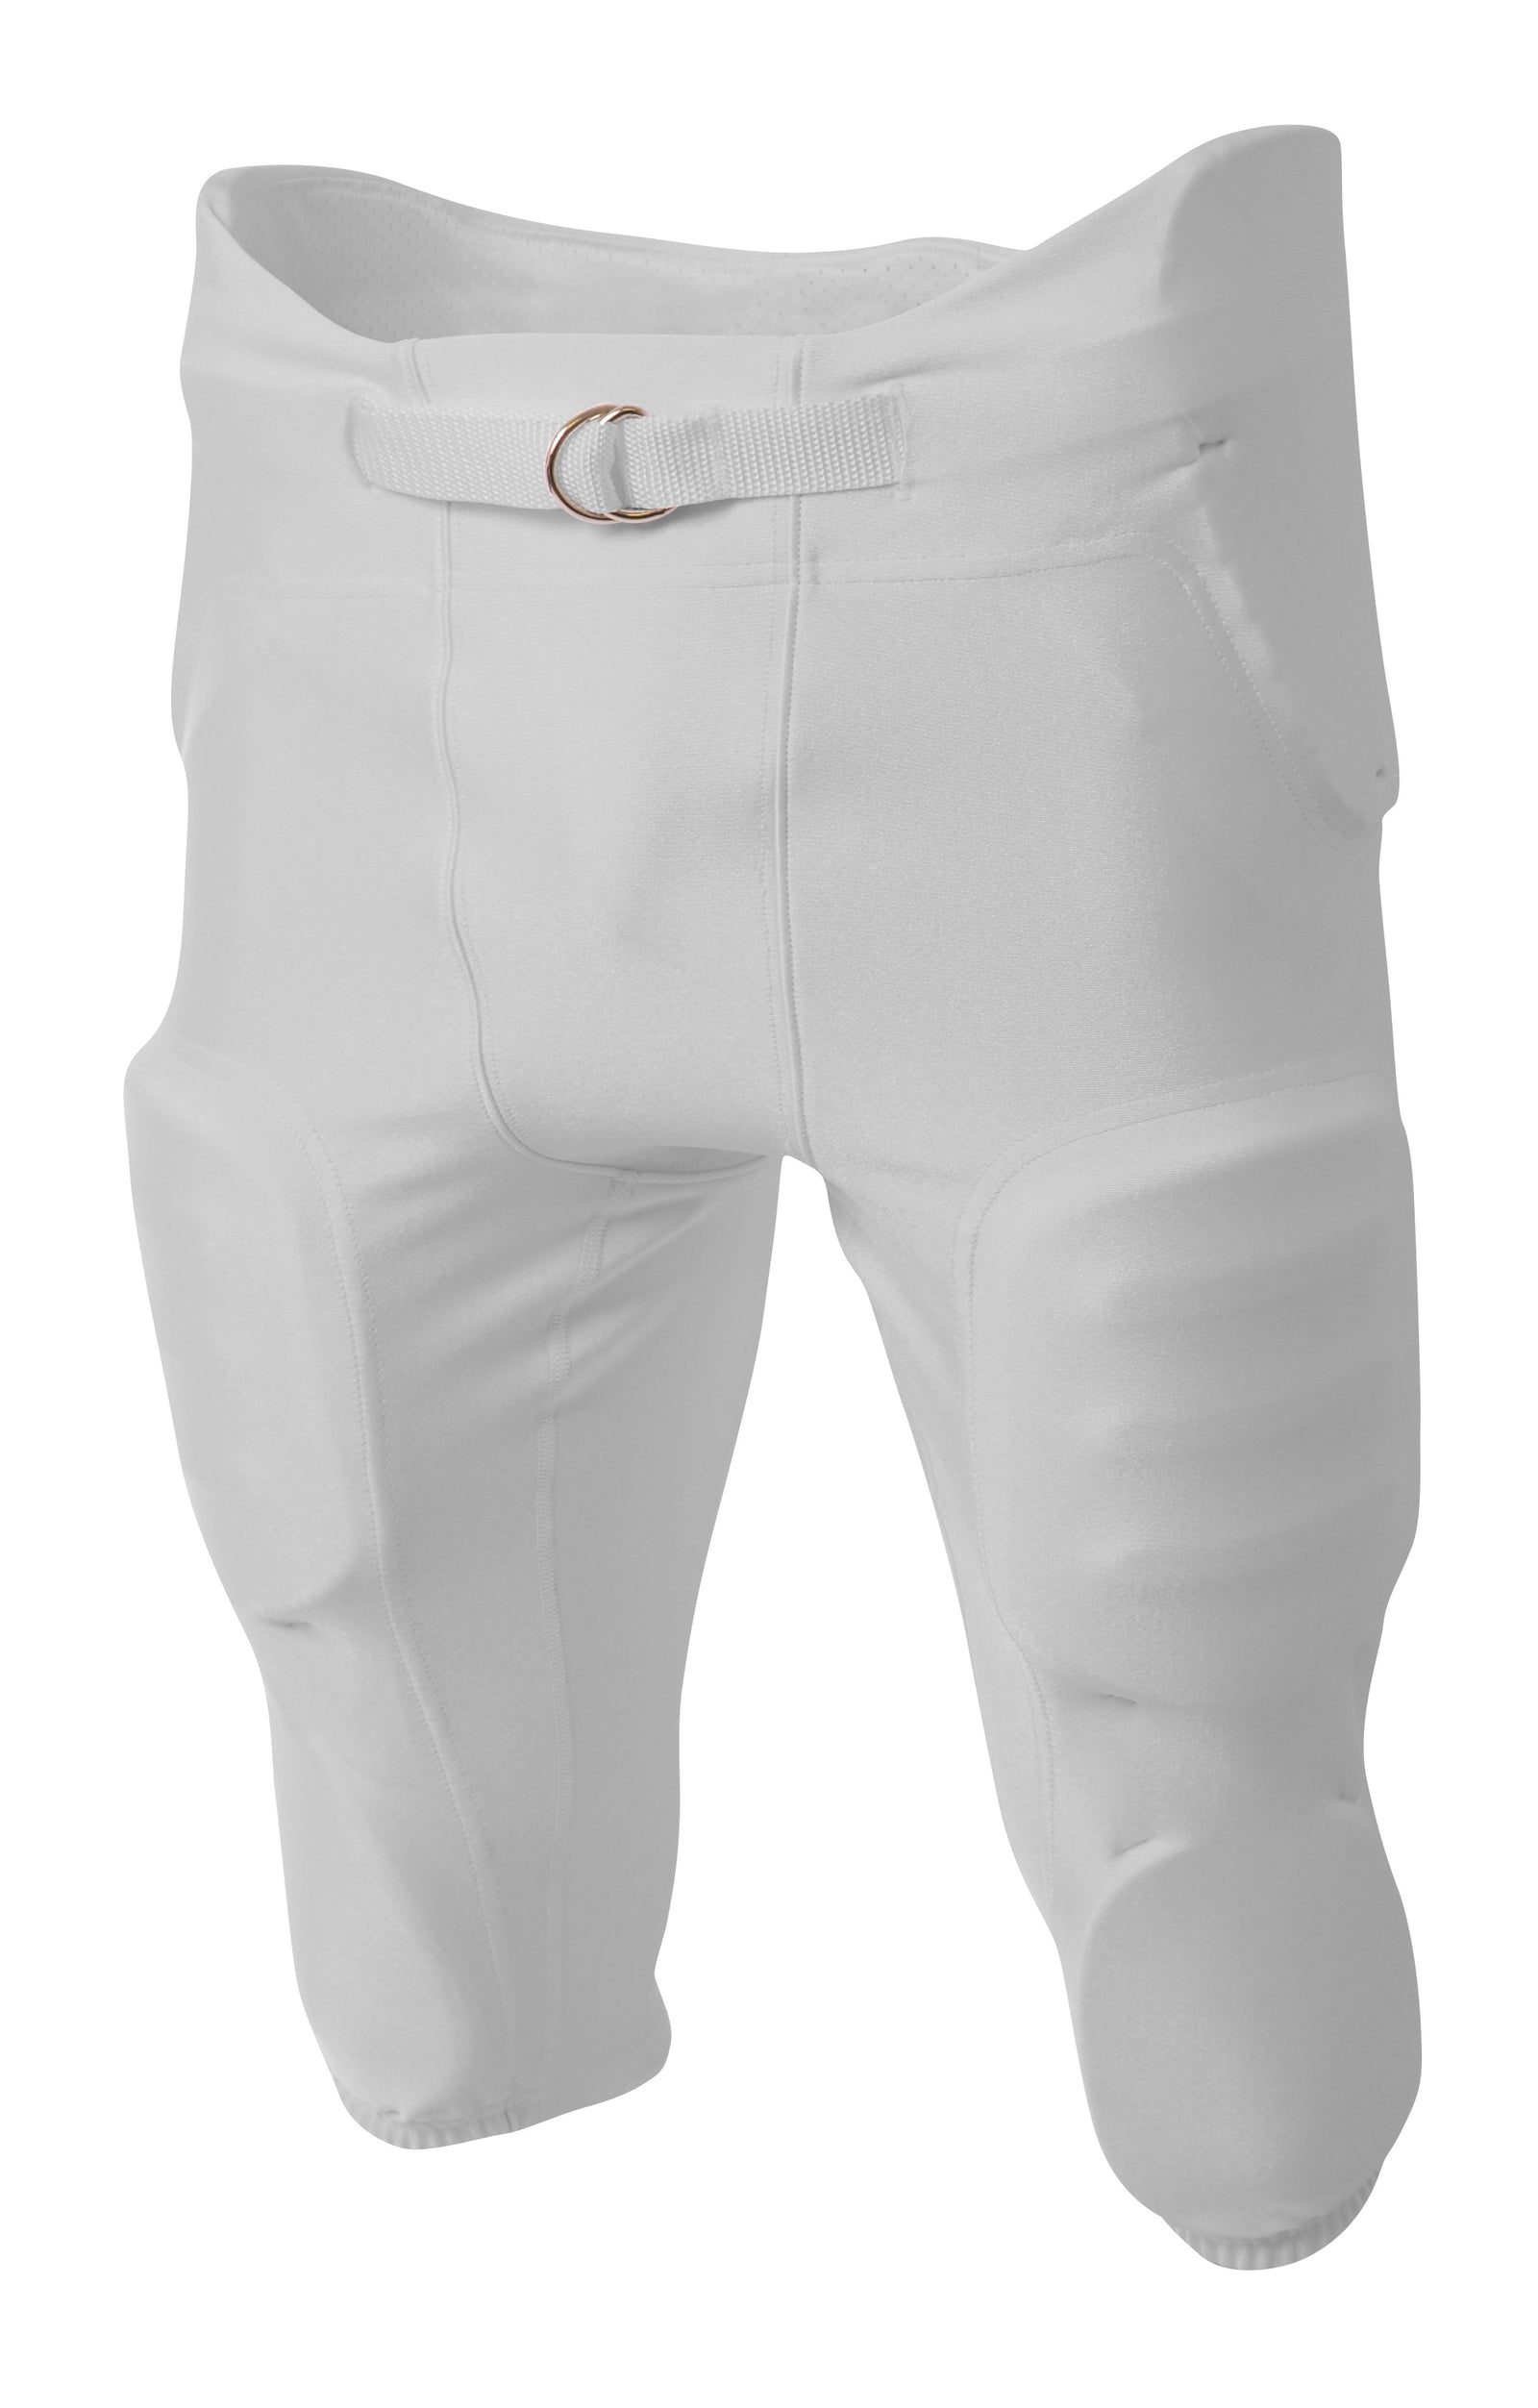 SILVER A4 Integrated Zone Football Pant